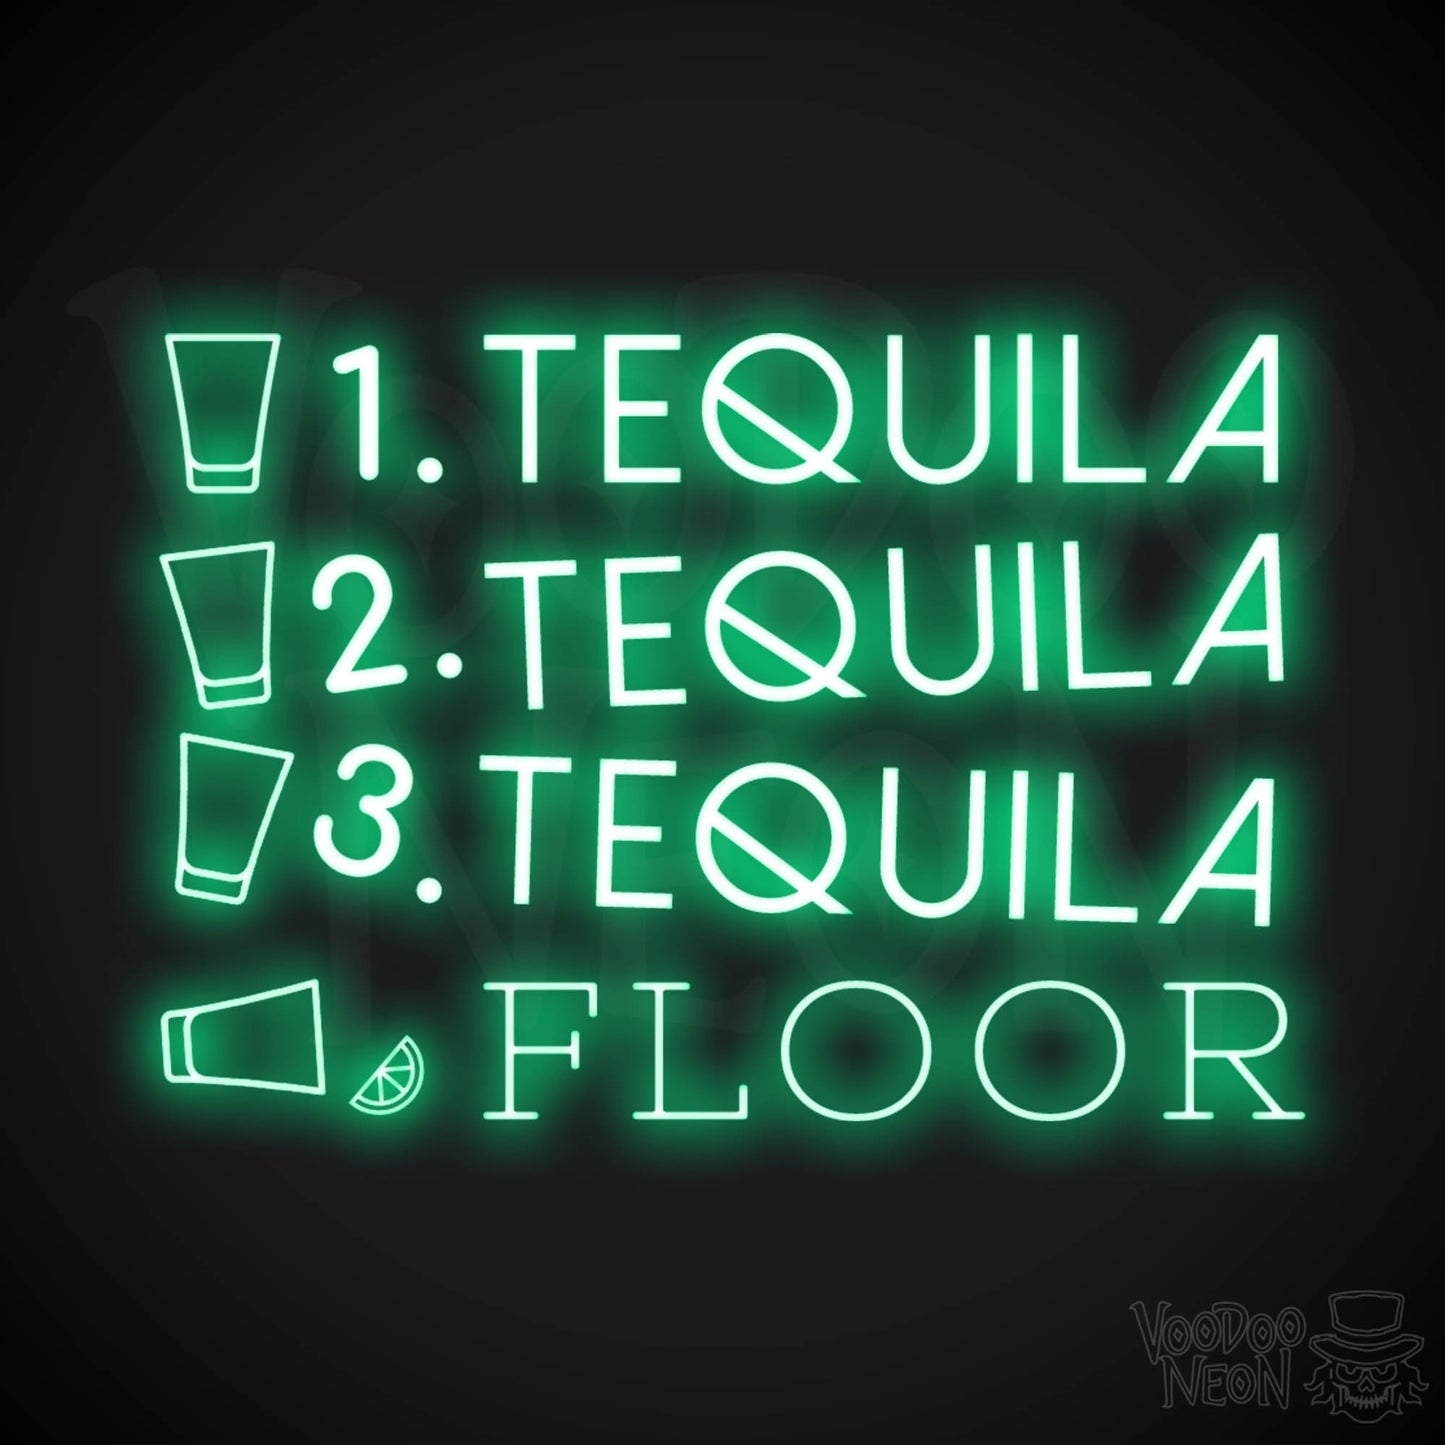 One Tequila Two Tequila Three Tequila Floor Neon sign - Neon Wall Art - Color Green